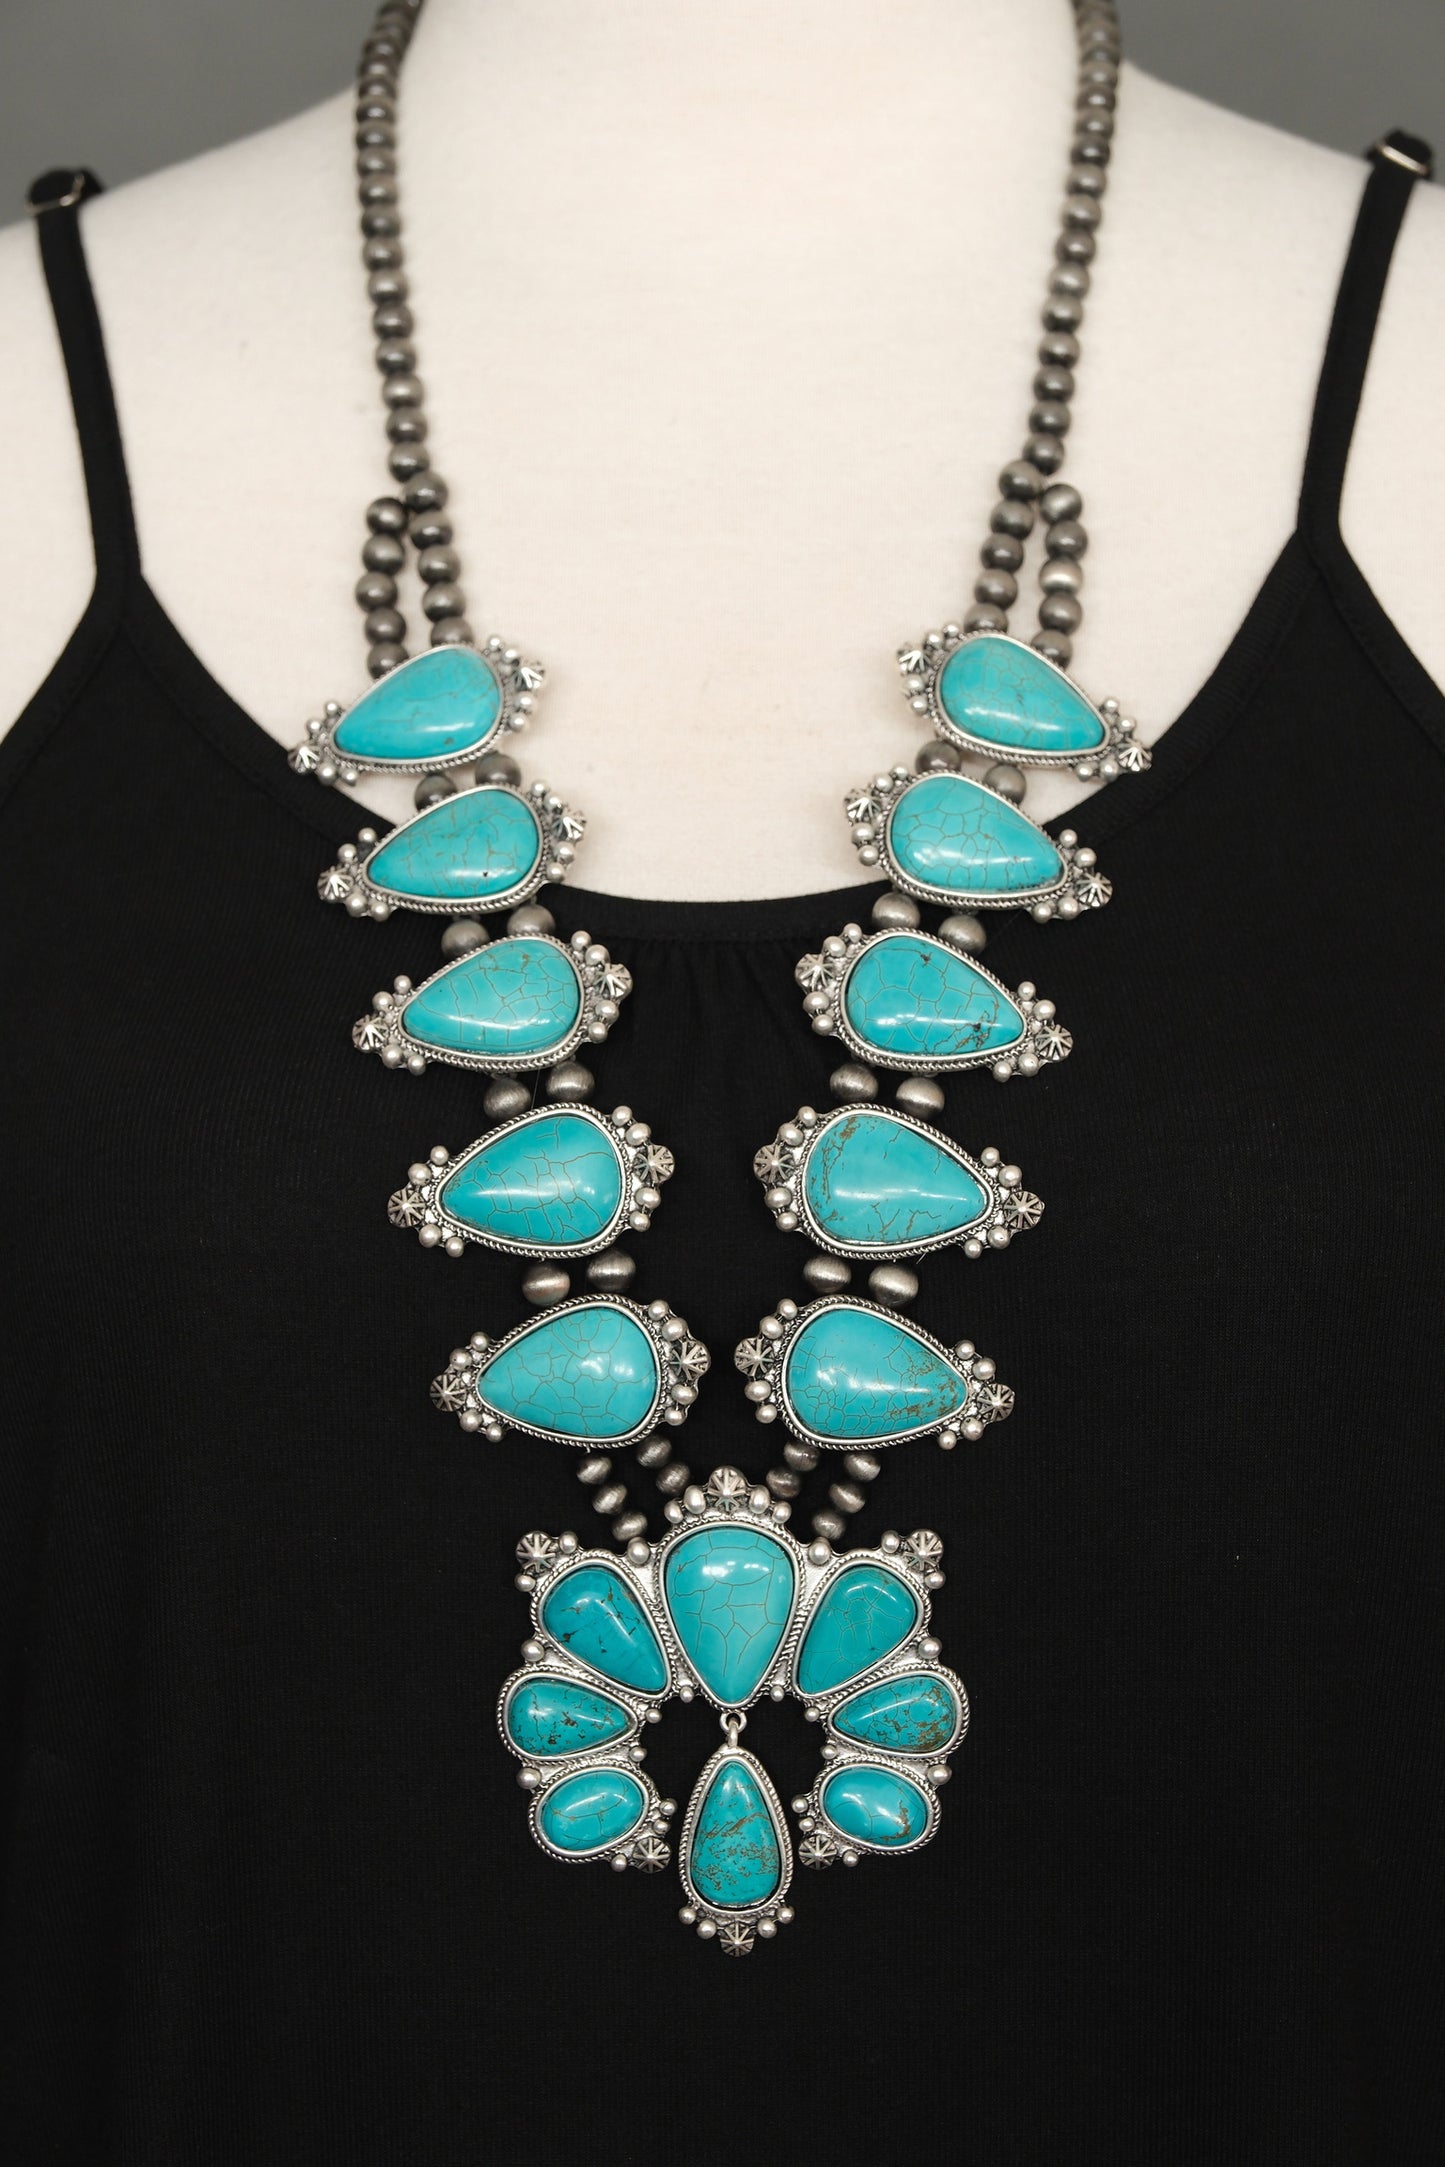 Turquoise Star Squash Blossom Necklace